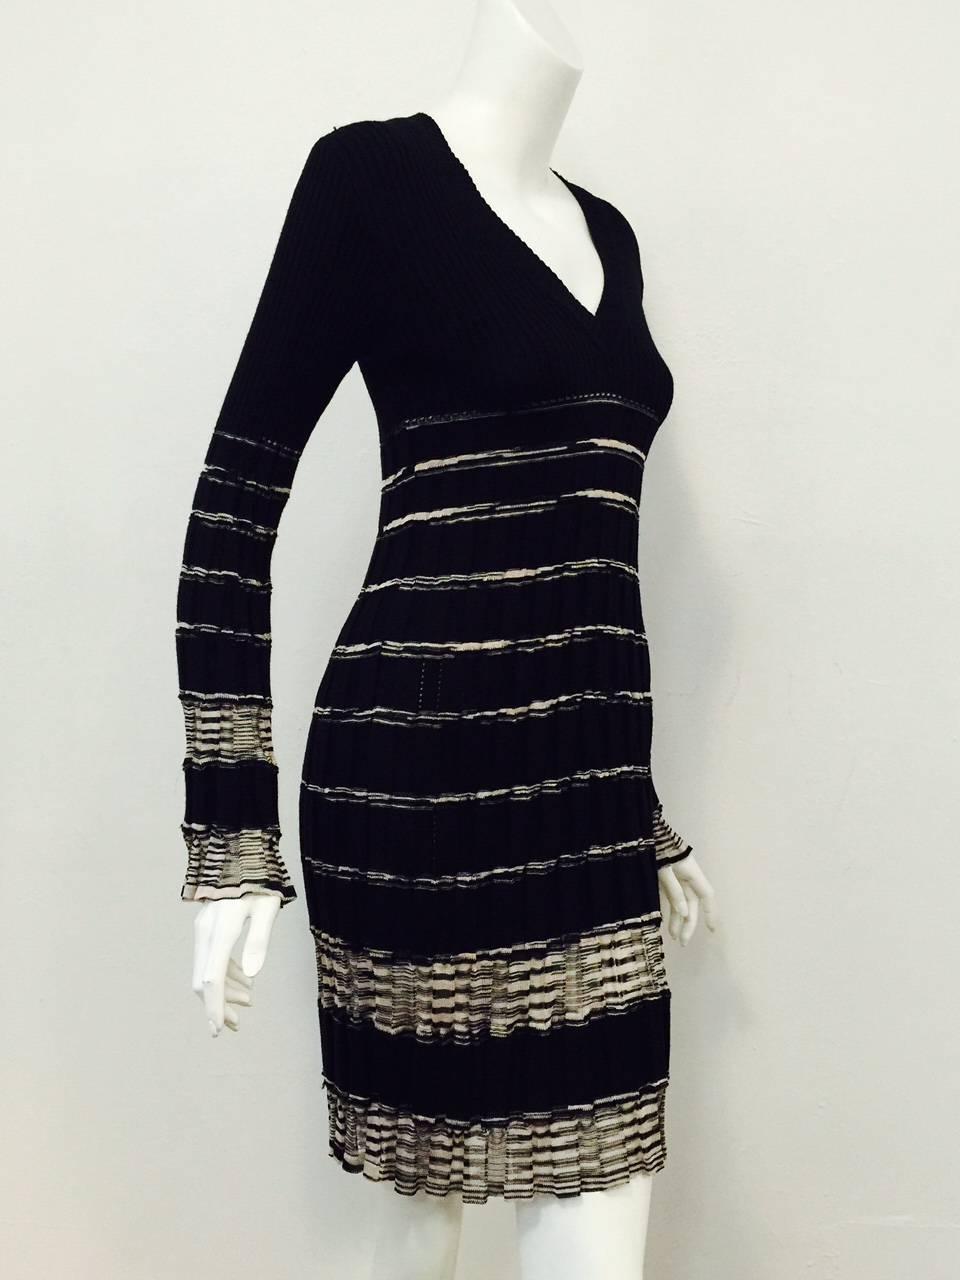 M Missoni All Season Wool Knit Dress is a must for connoisseurs of all things Missoni!  Perfect for travel, black and tan dress features feminine 